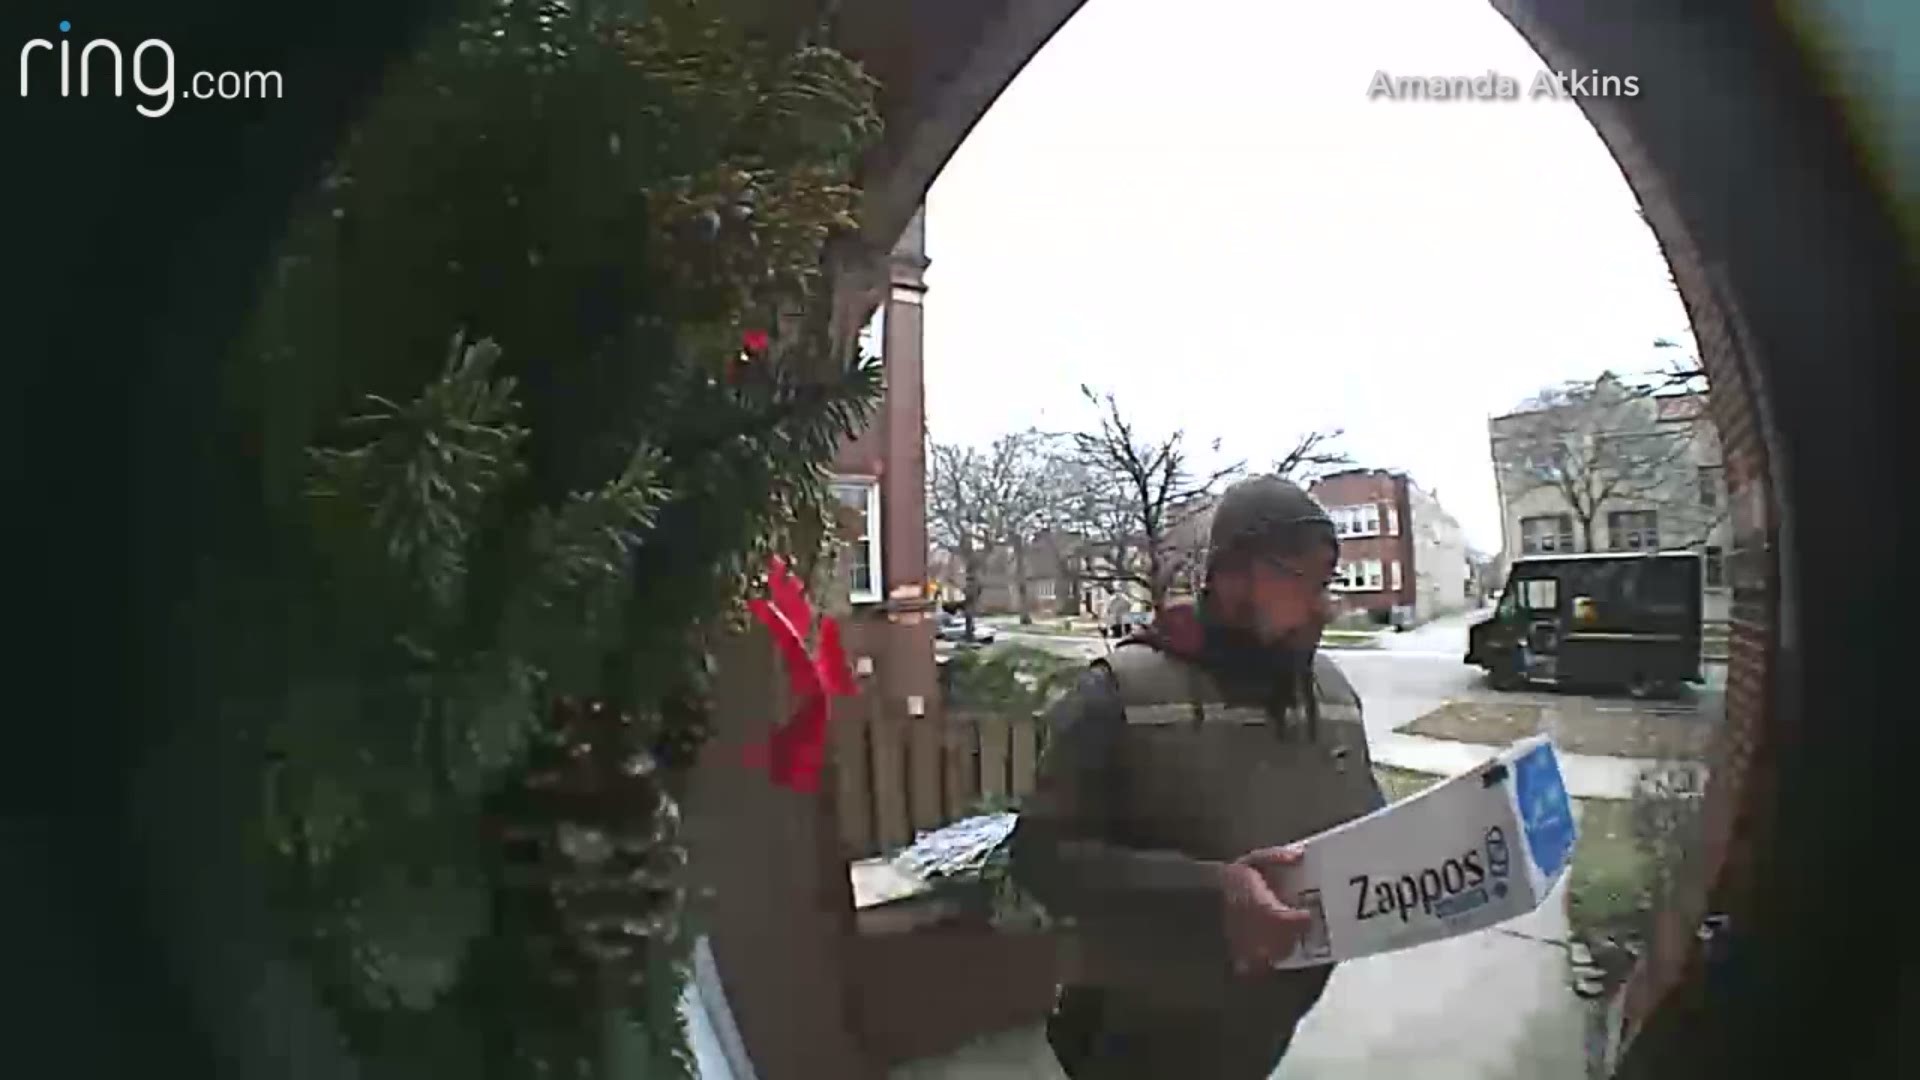 A Chicagoan's Ring app caught an unexpectedly friendly moment on Wednesday when a squirrel jumped onto the back of a UPS driver as he made a delivery.